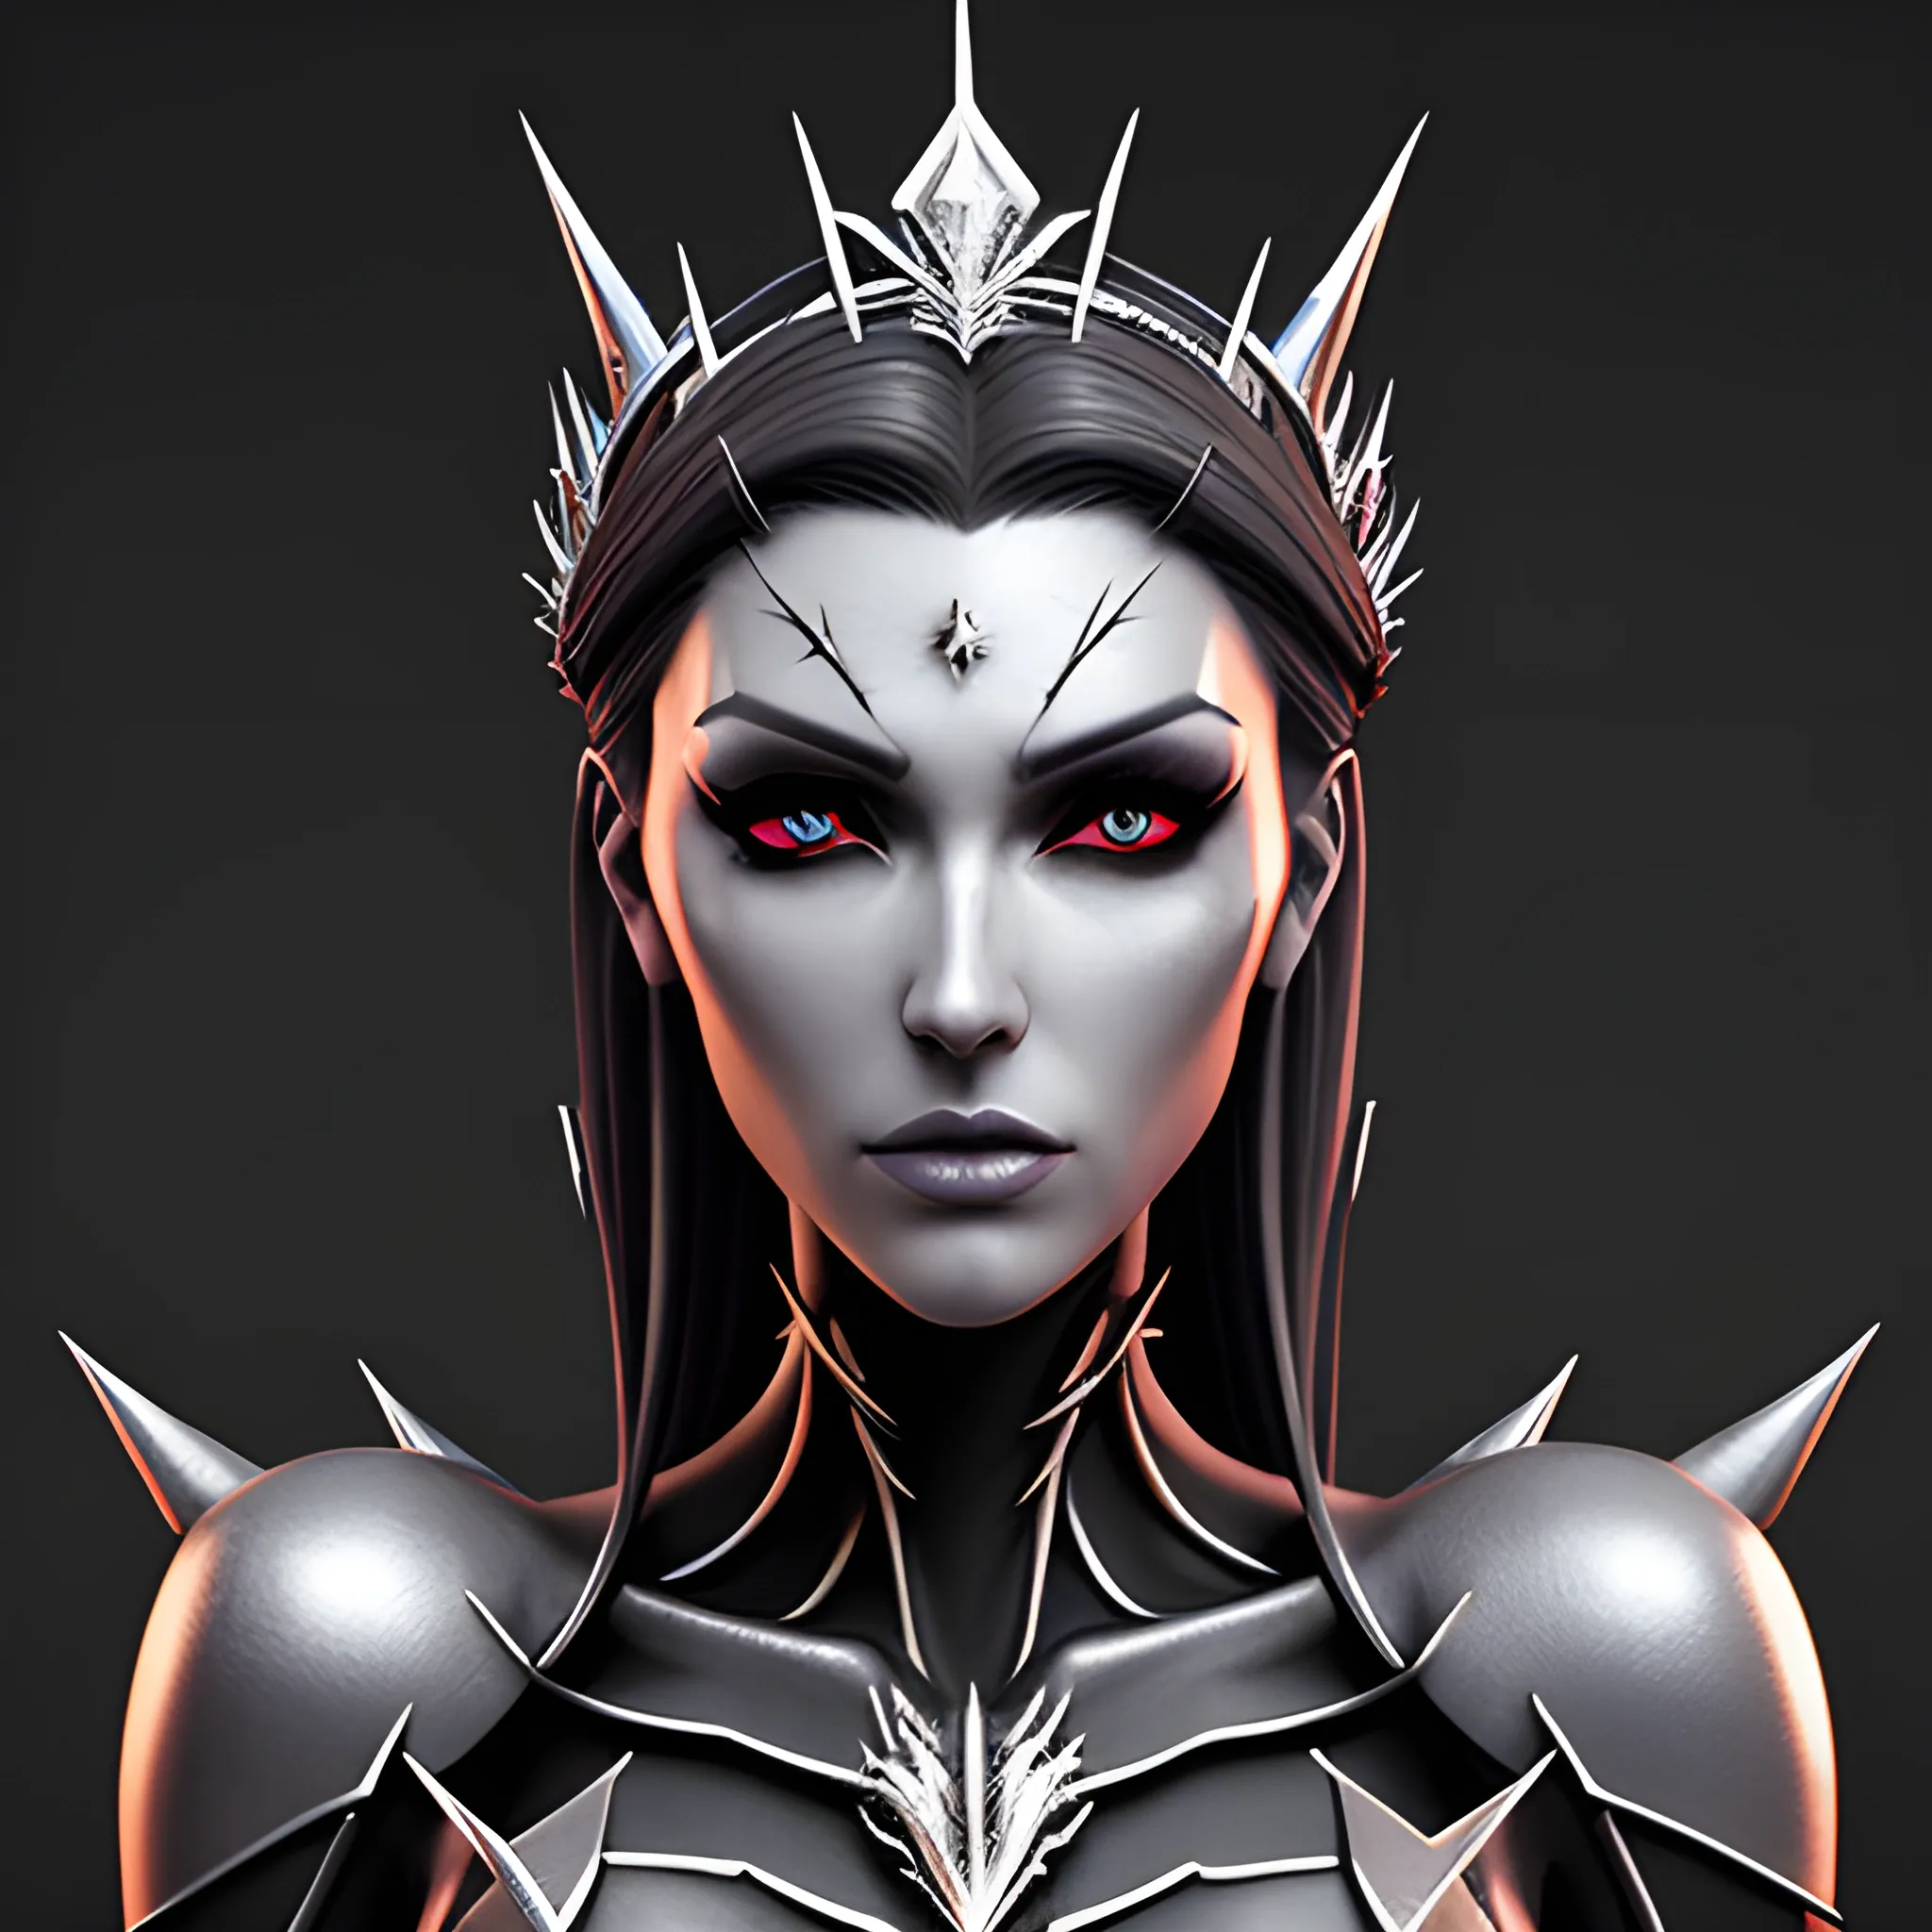 Create a hyper-detailed 3D model of a slender and stunning girl adorned with a crown made of thorns, featuring additional spikes. The design should be inspired by realistic renderings and anime-esque characters, combining elements of realistic portraiture, heistcore, and dragoncore. The model should reflect delicate realism, emphasizing dark colors throughout.